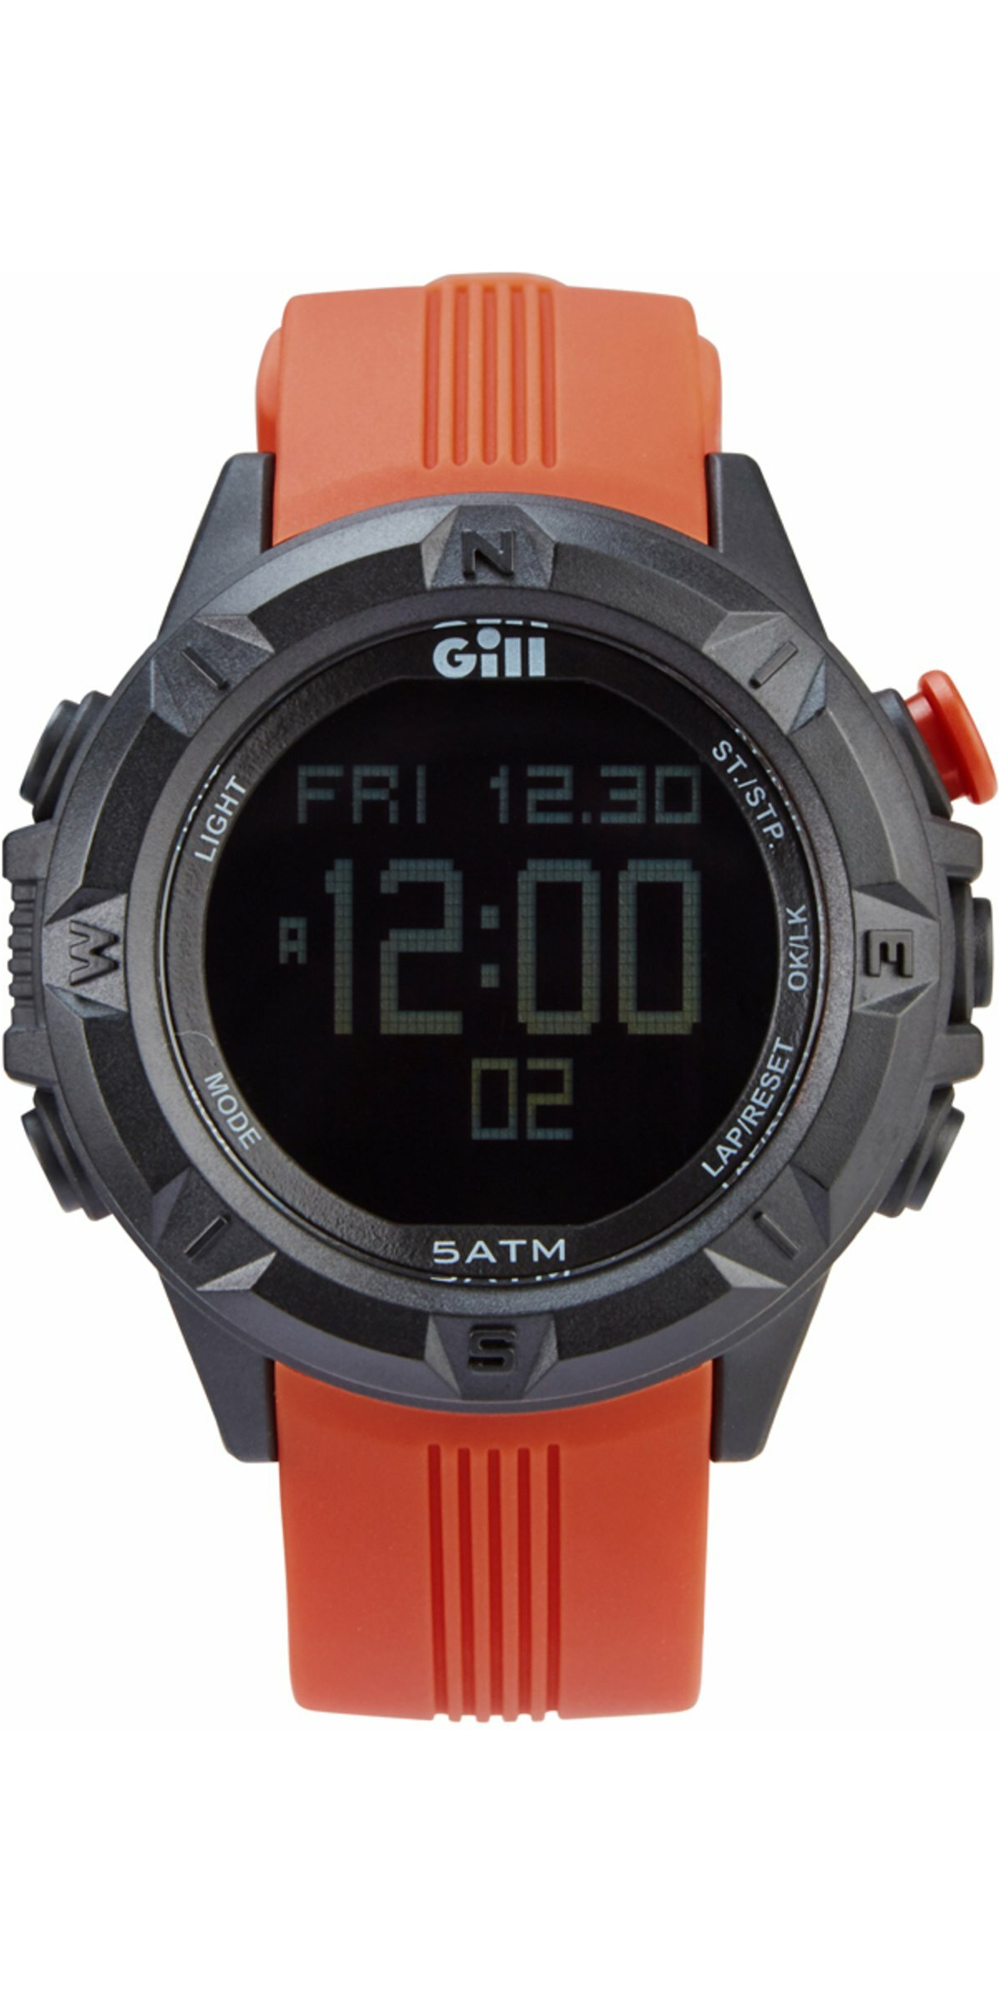 2022 Gill Stealth Racer Watch W017 - Arancione - Vela - Accessori - Orologi  | Wetsuit Outlet